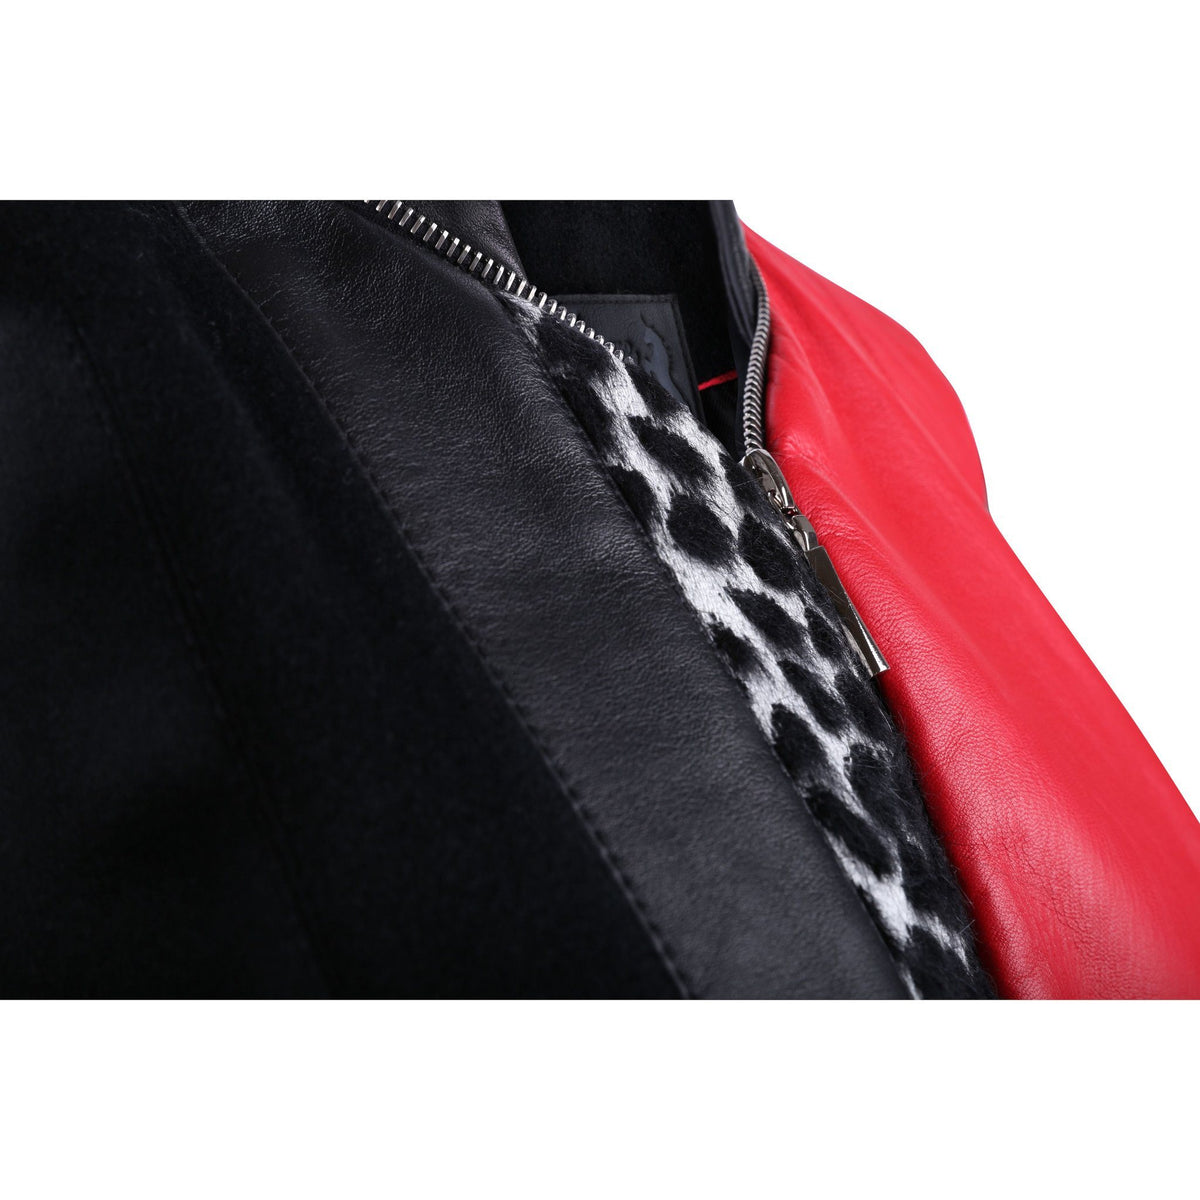 Black and Red Leather Bomber Jacket with Leopard Print Motif - VOLS &amp; ORIGINAL